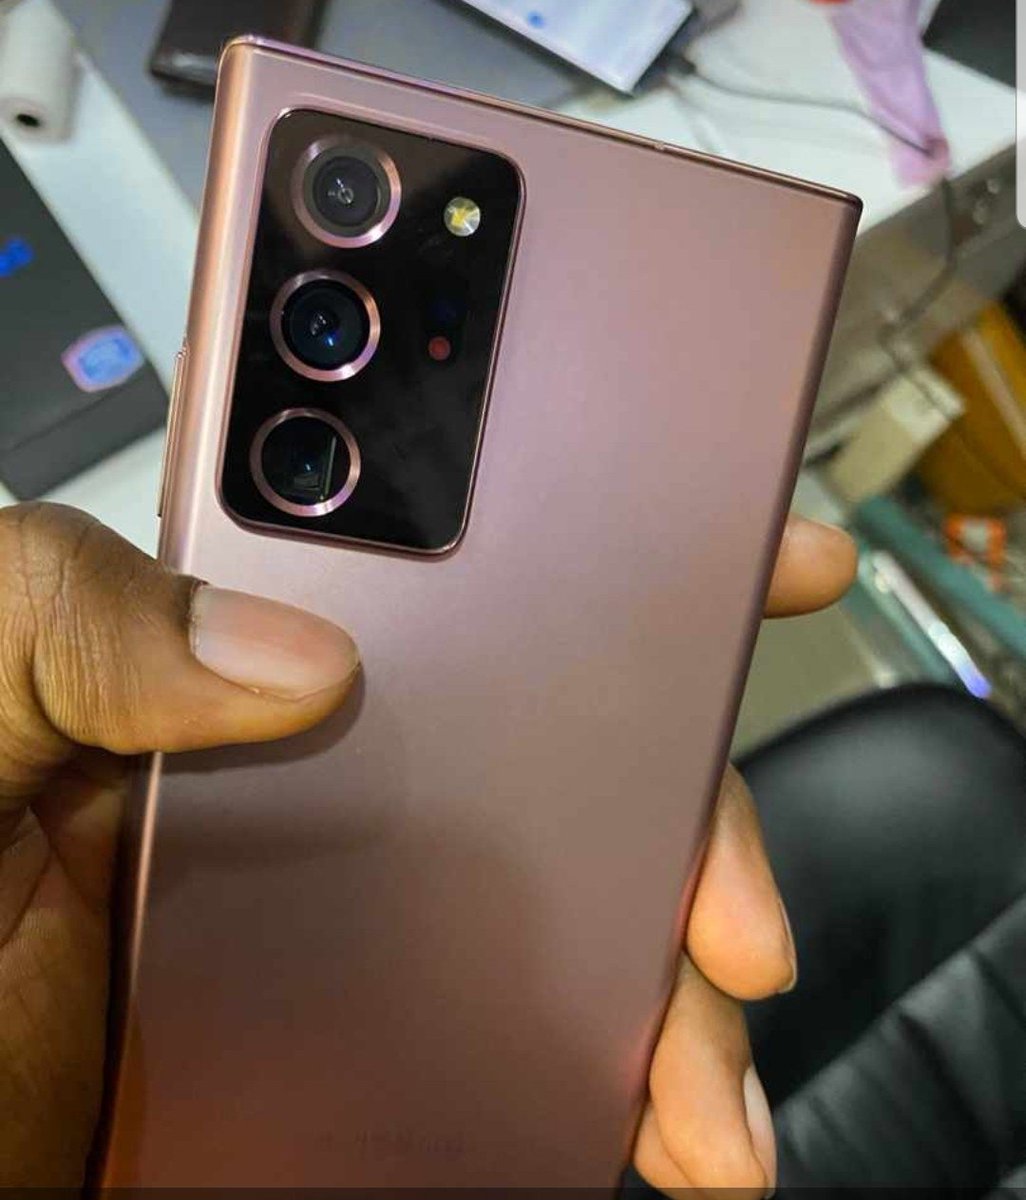 Grade A Samsung note 20 ultra available limited stock first come first serve.. Price.. 405k To place your order Dm/call/WhatsApp 08086717706 #SilhoutteChallenge #samsungnote20ultra